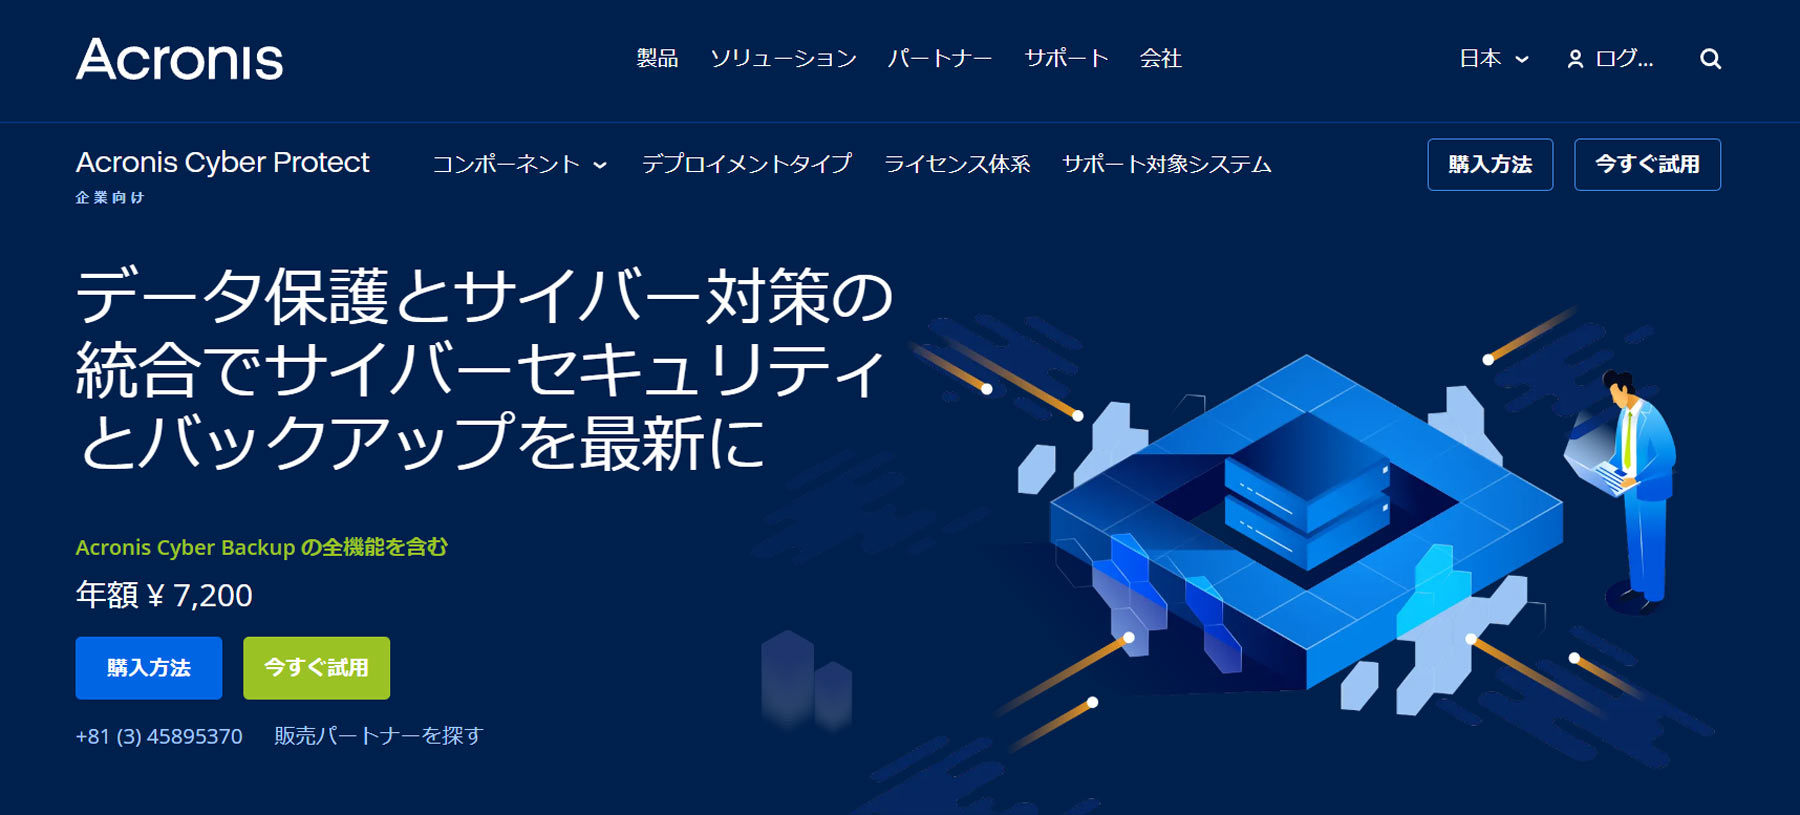 Acronis Cyber Protect公式Webサイト